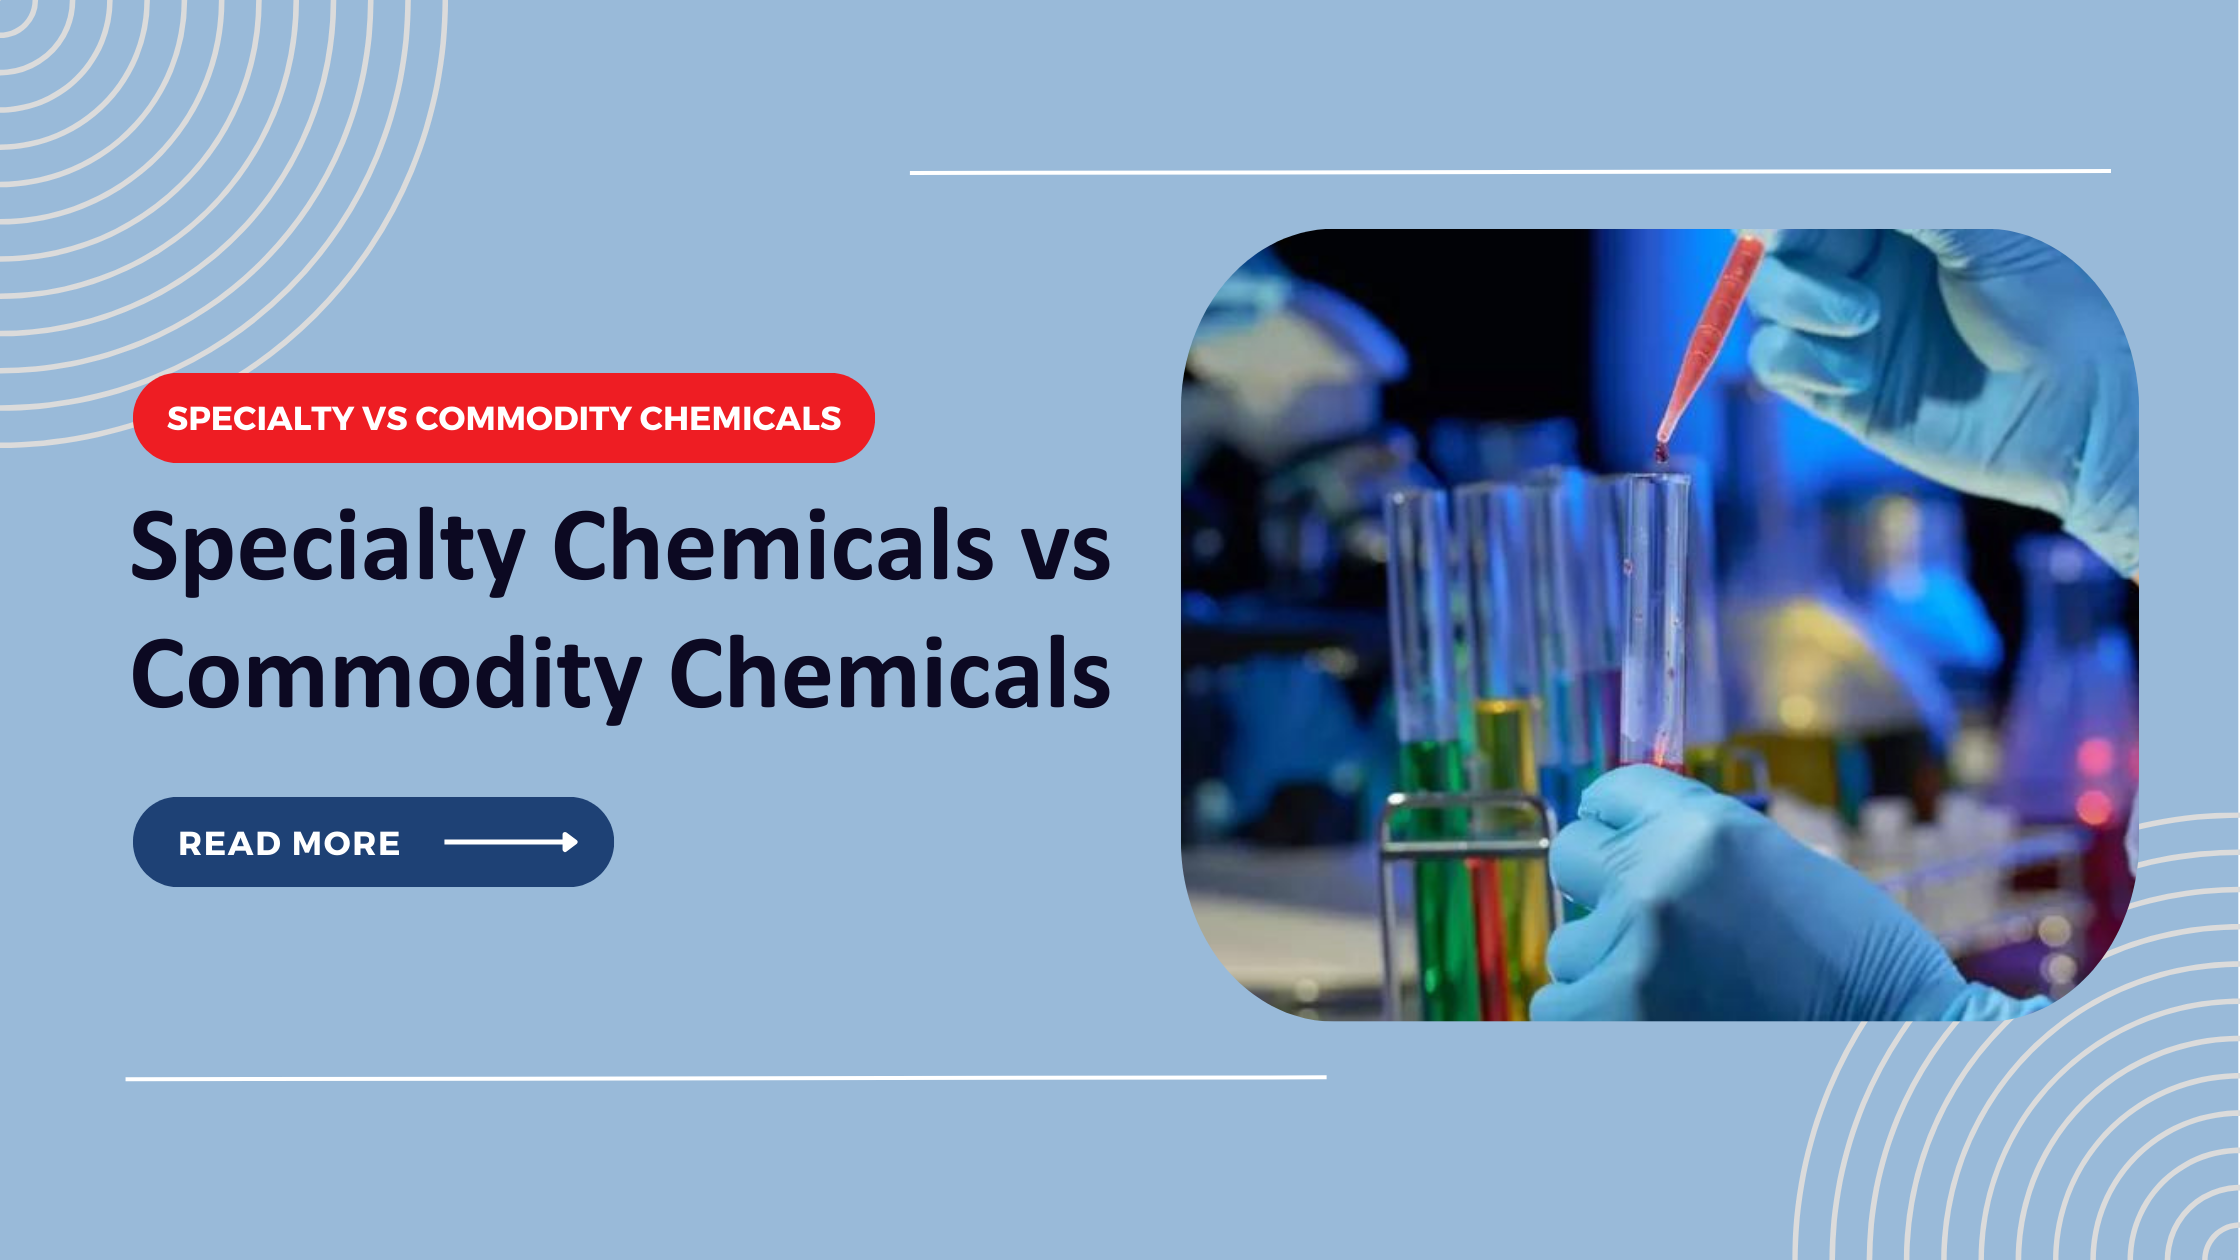 Specialty Chemicals vs Commodity Chemicals